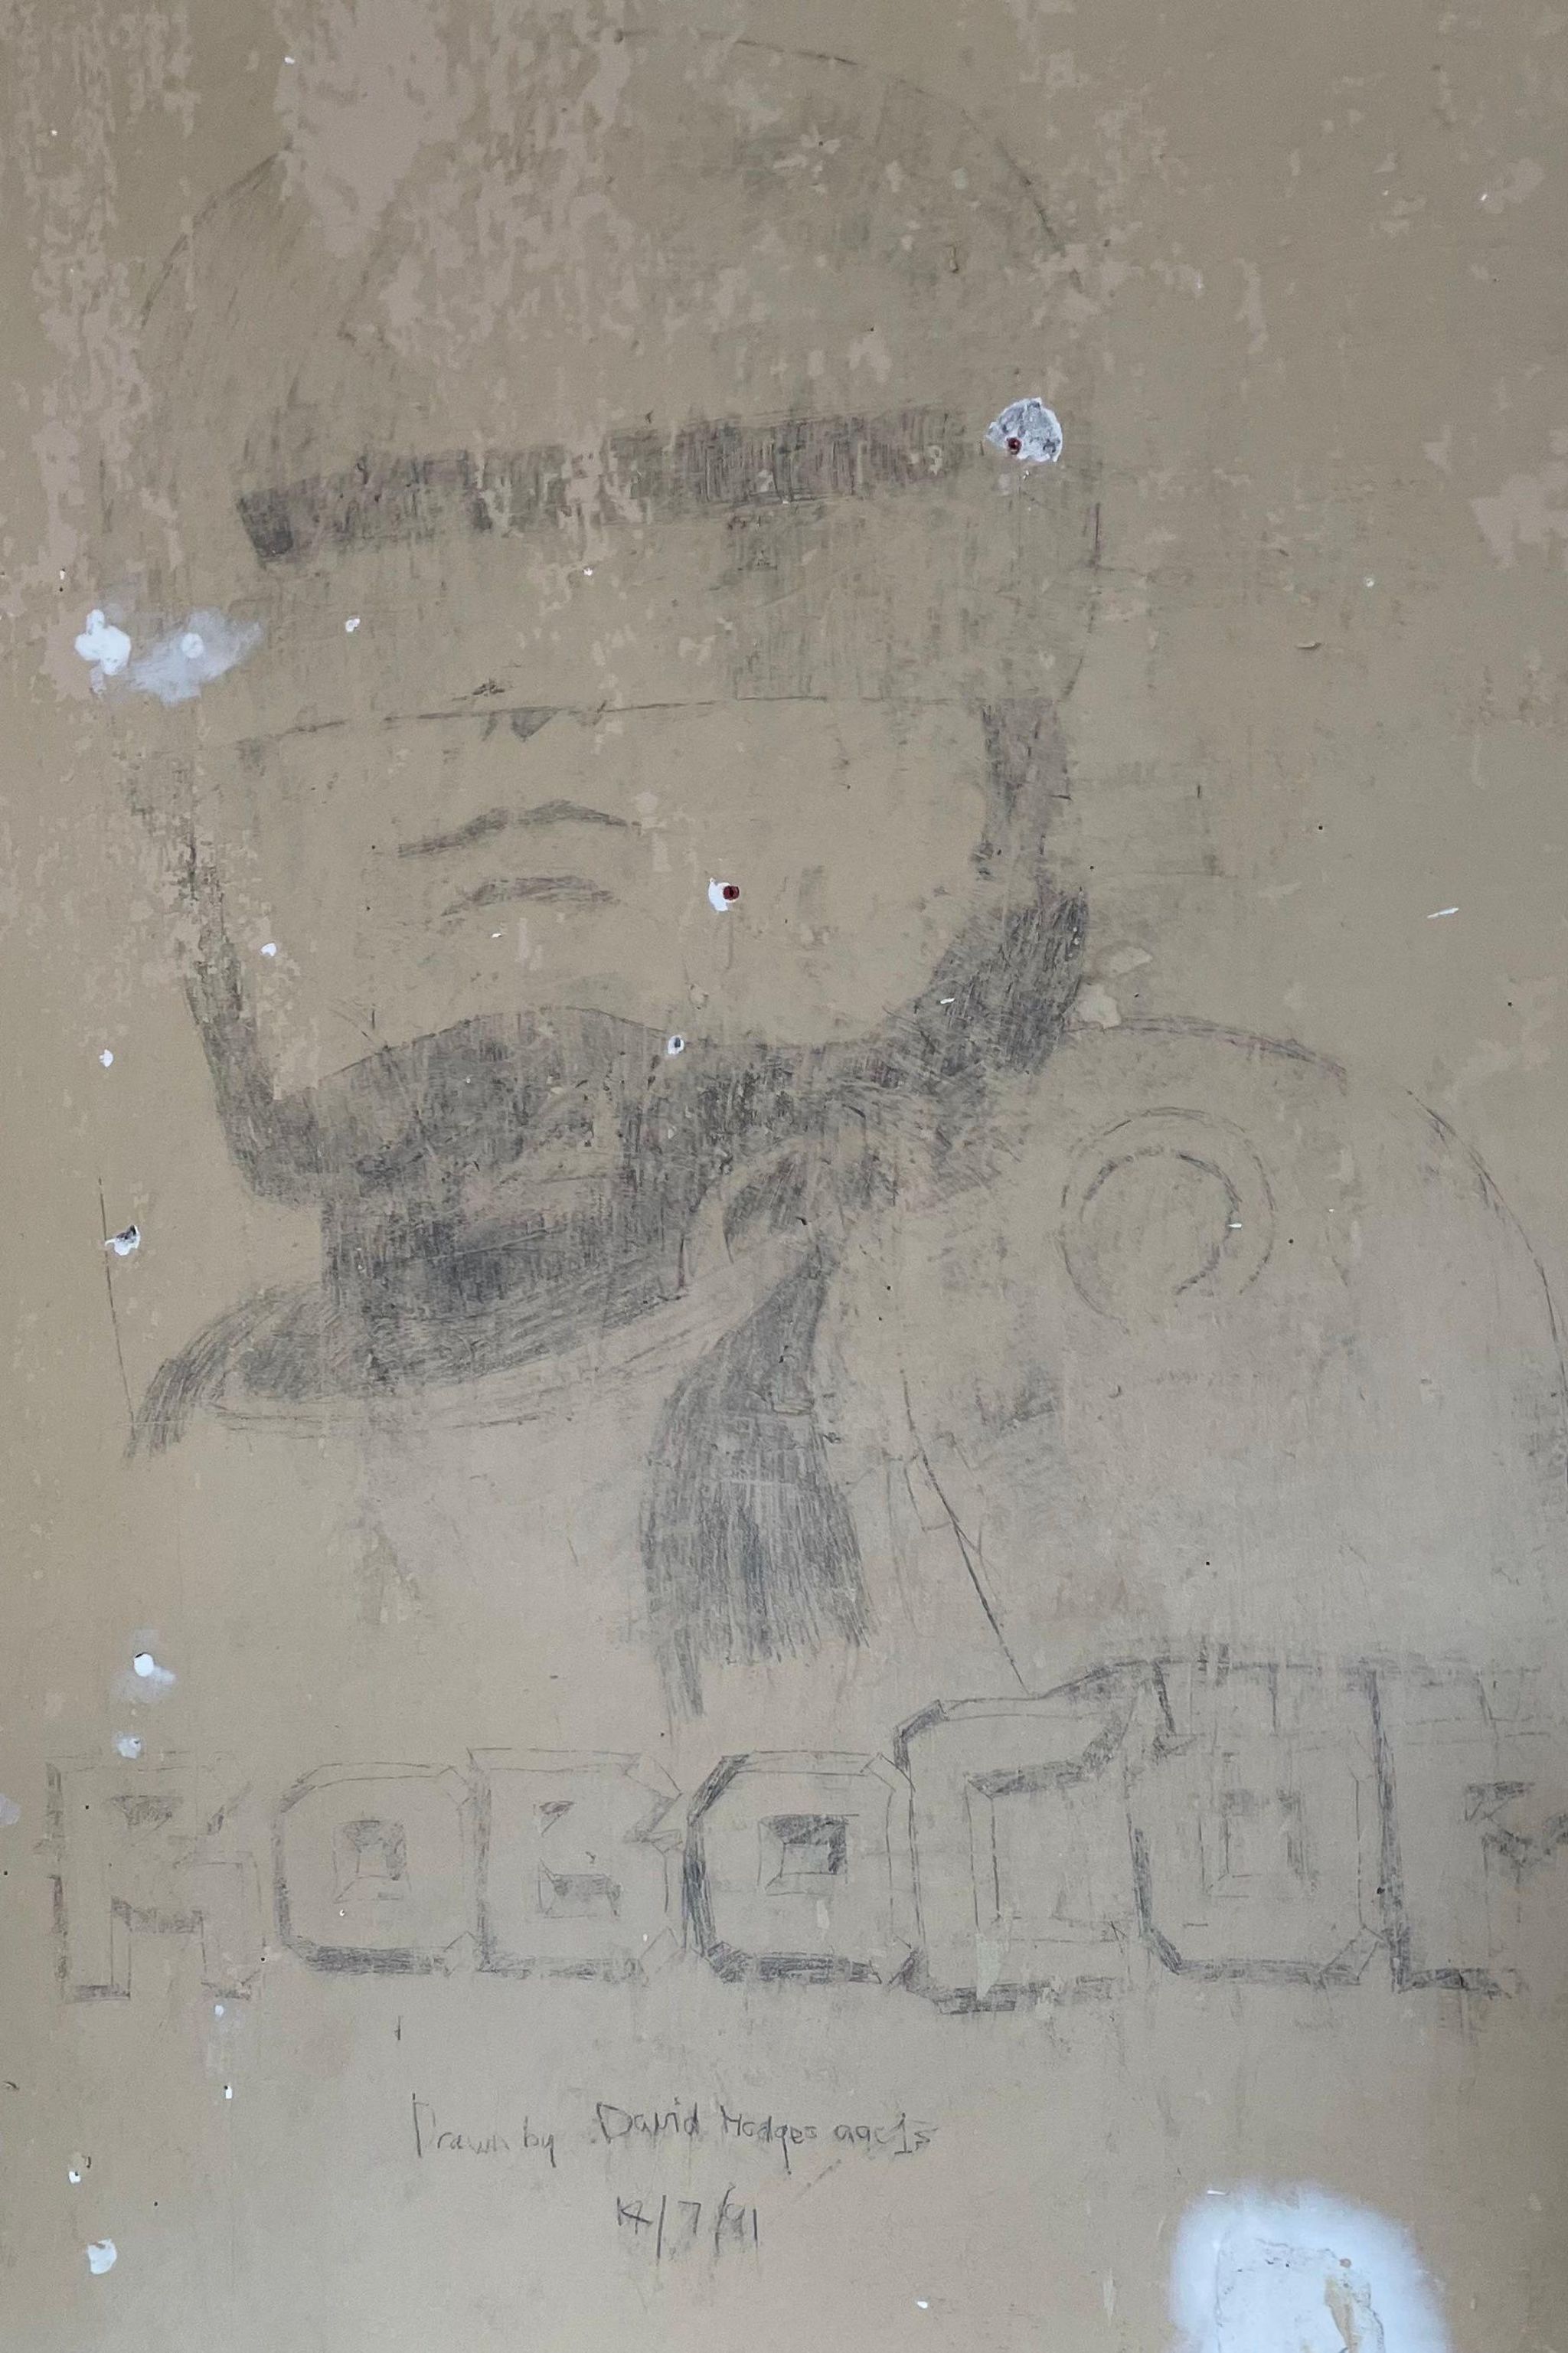 A drawing on the wall of Robocop